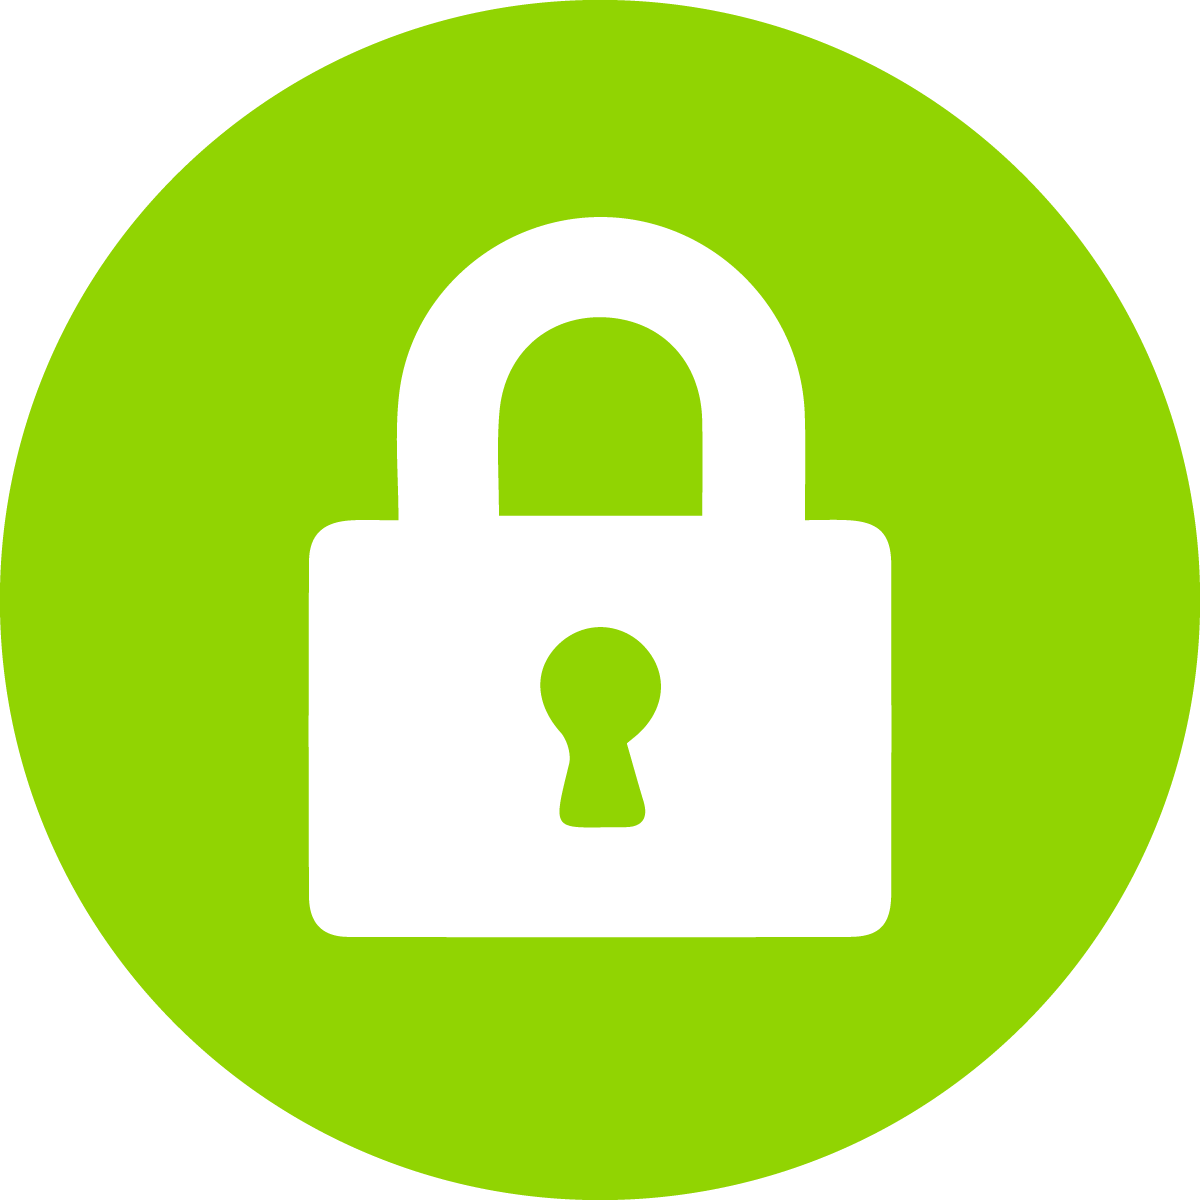 A white padlock on a bright green background